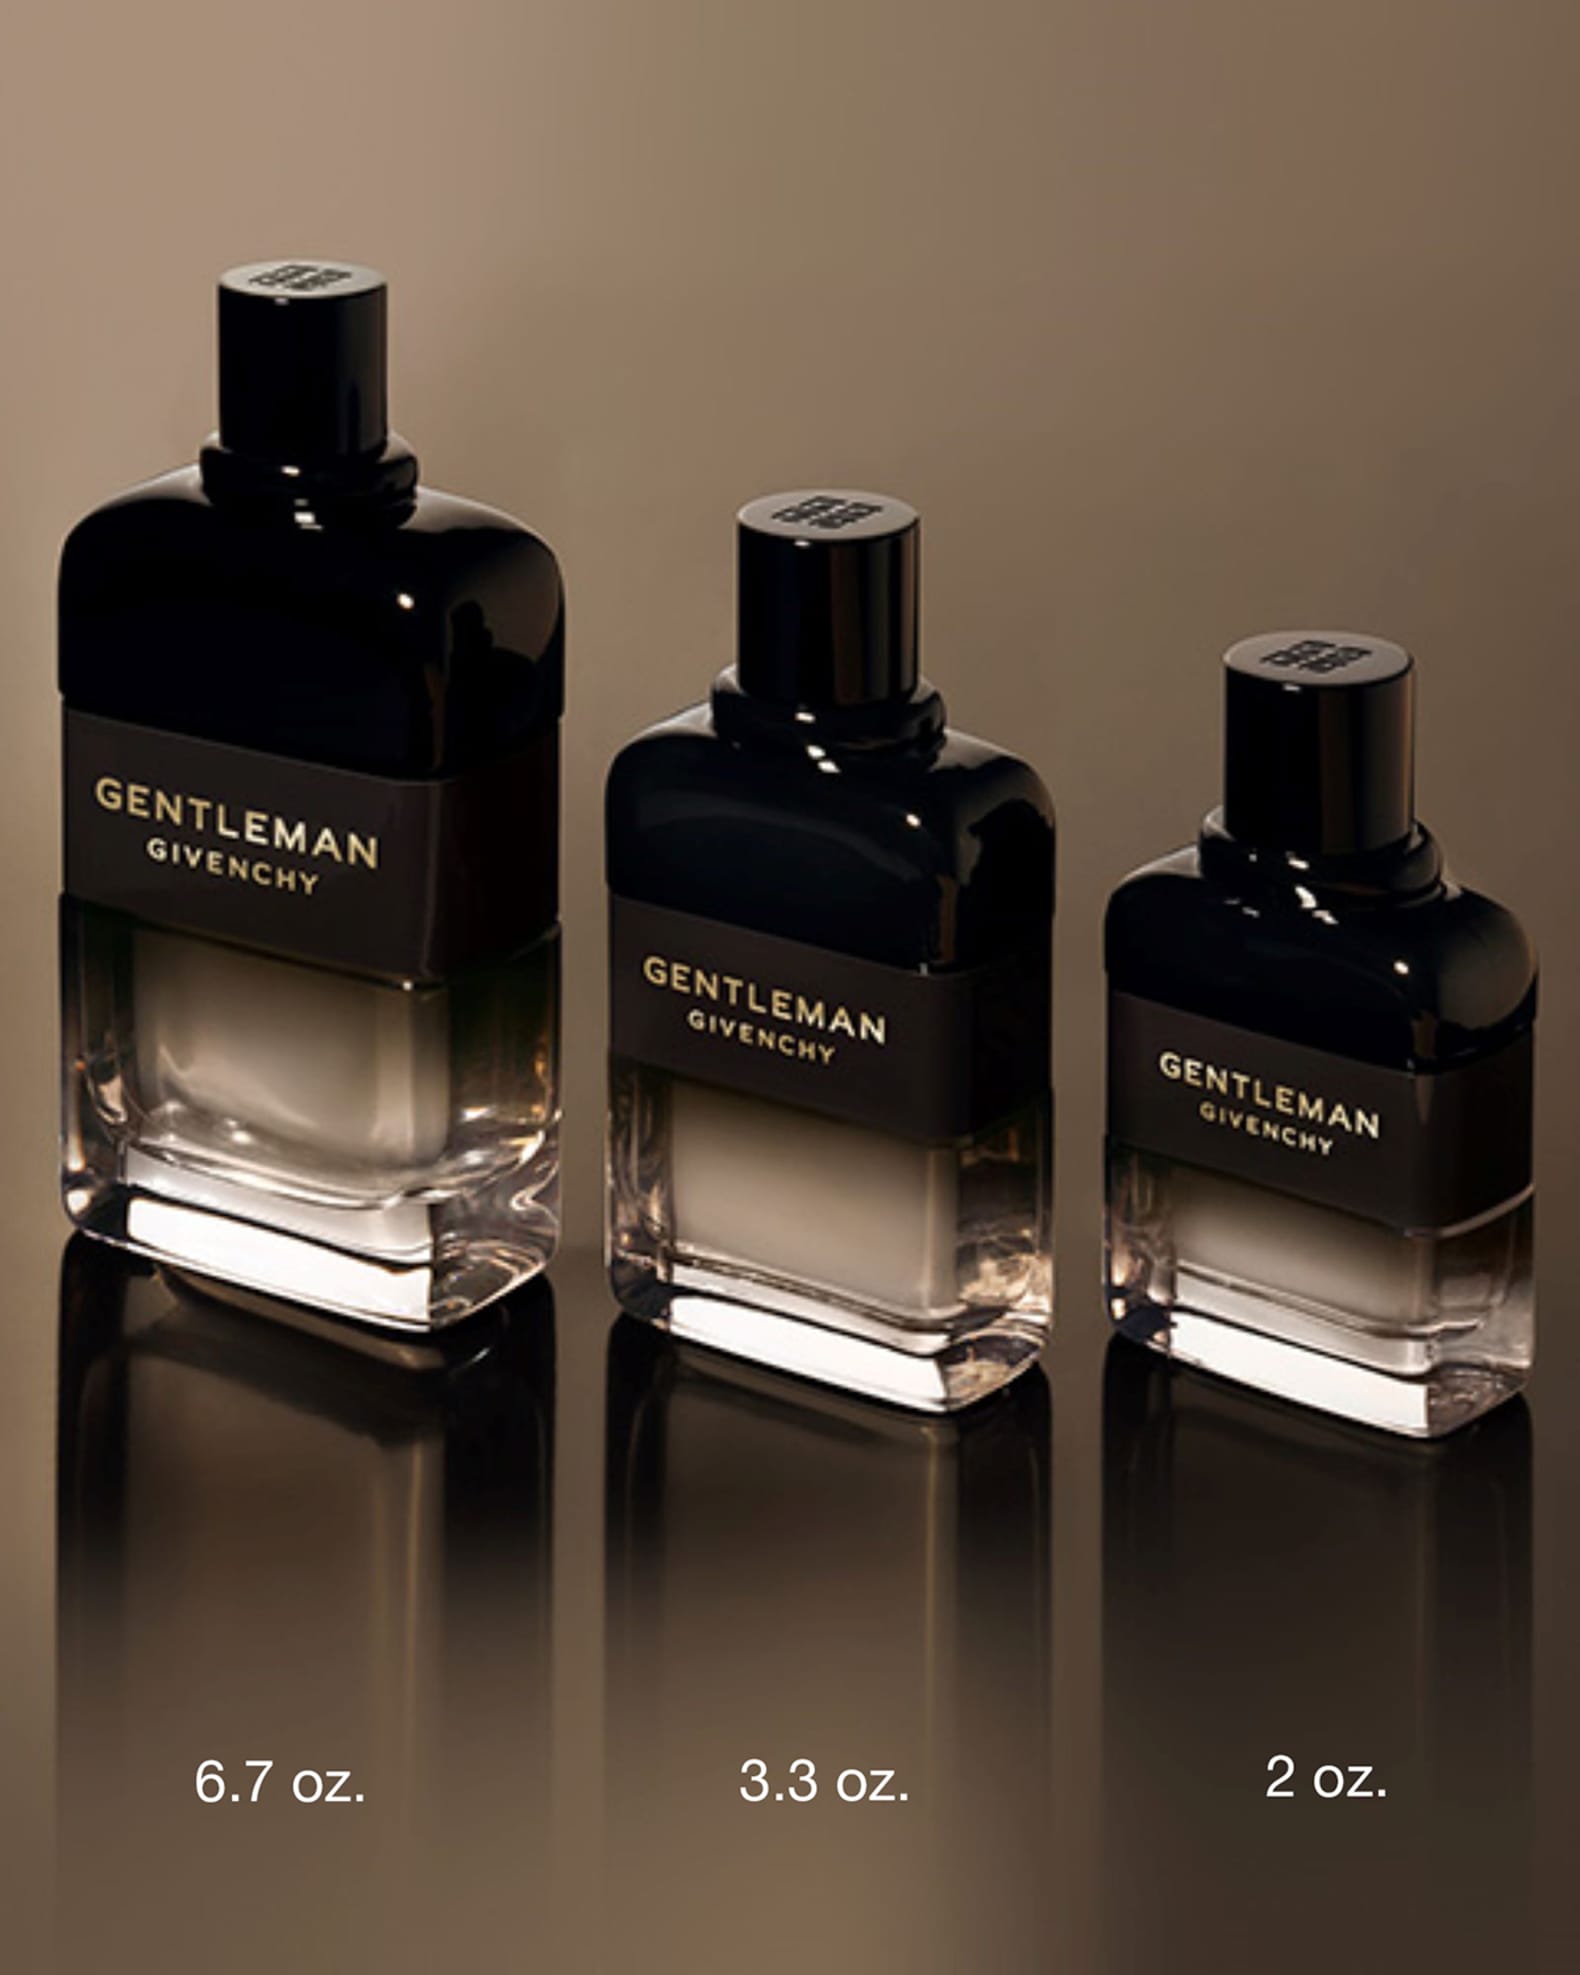 Givenchy Gentleman Boisee 2 Piece Gift Set